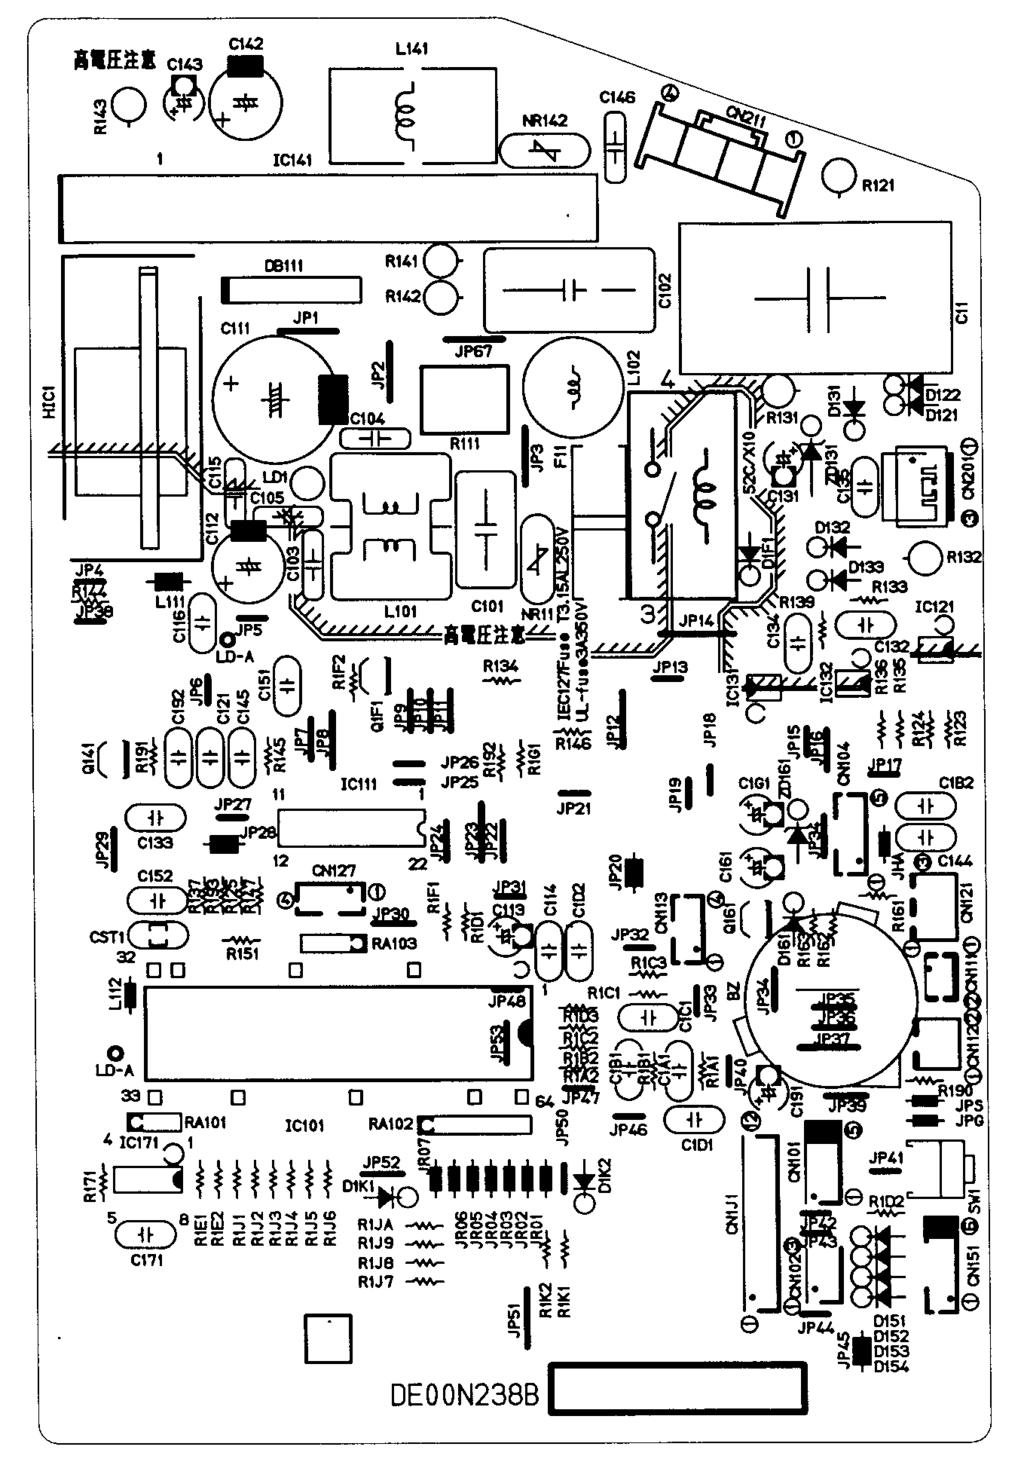 TEST POINT DIAGRAM AND VOLTAGE MSH-8RV - E MSH-RV - E Indoor electronic control P.C. board Fan motor power supply Fuse(F) 50V AC.